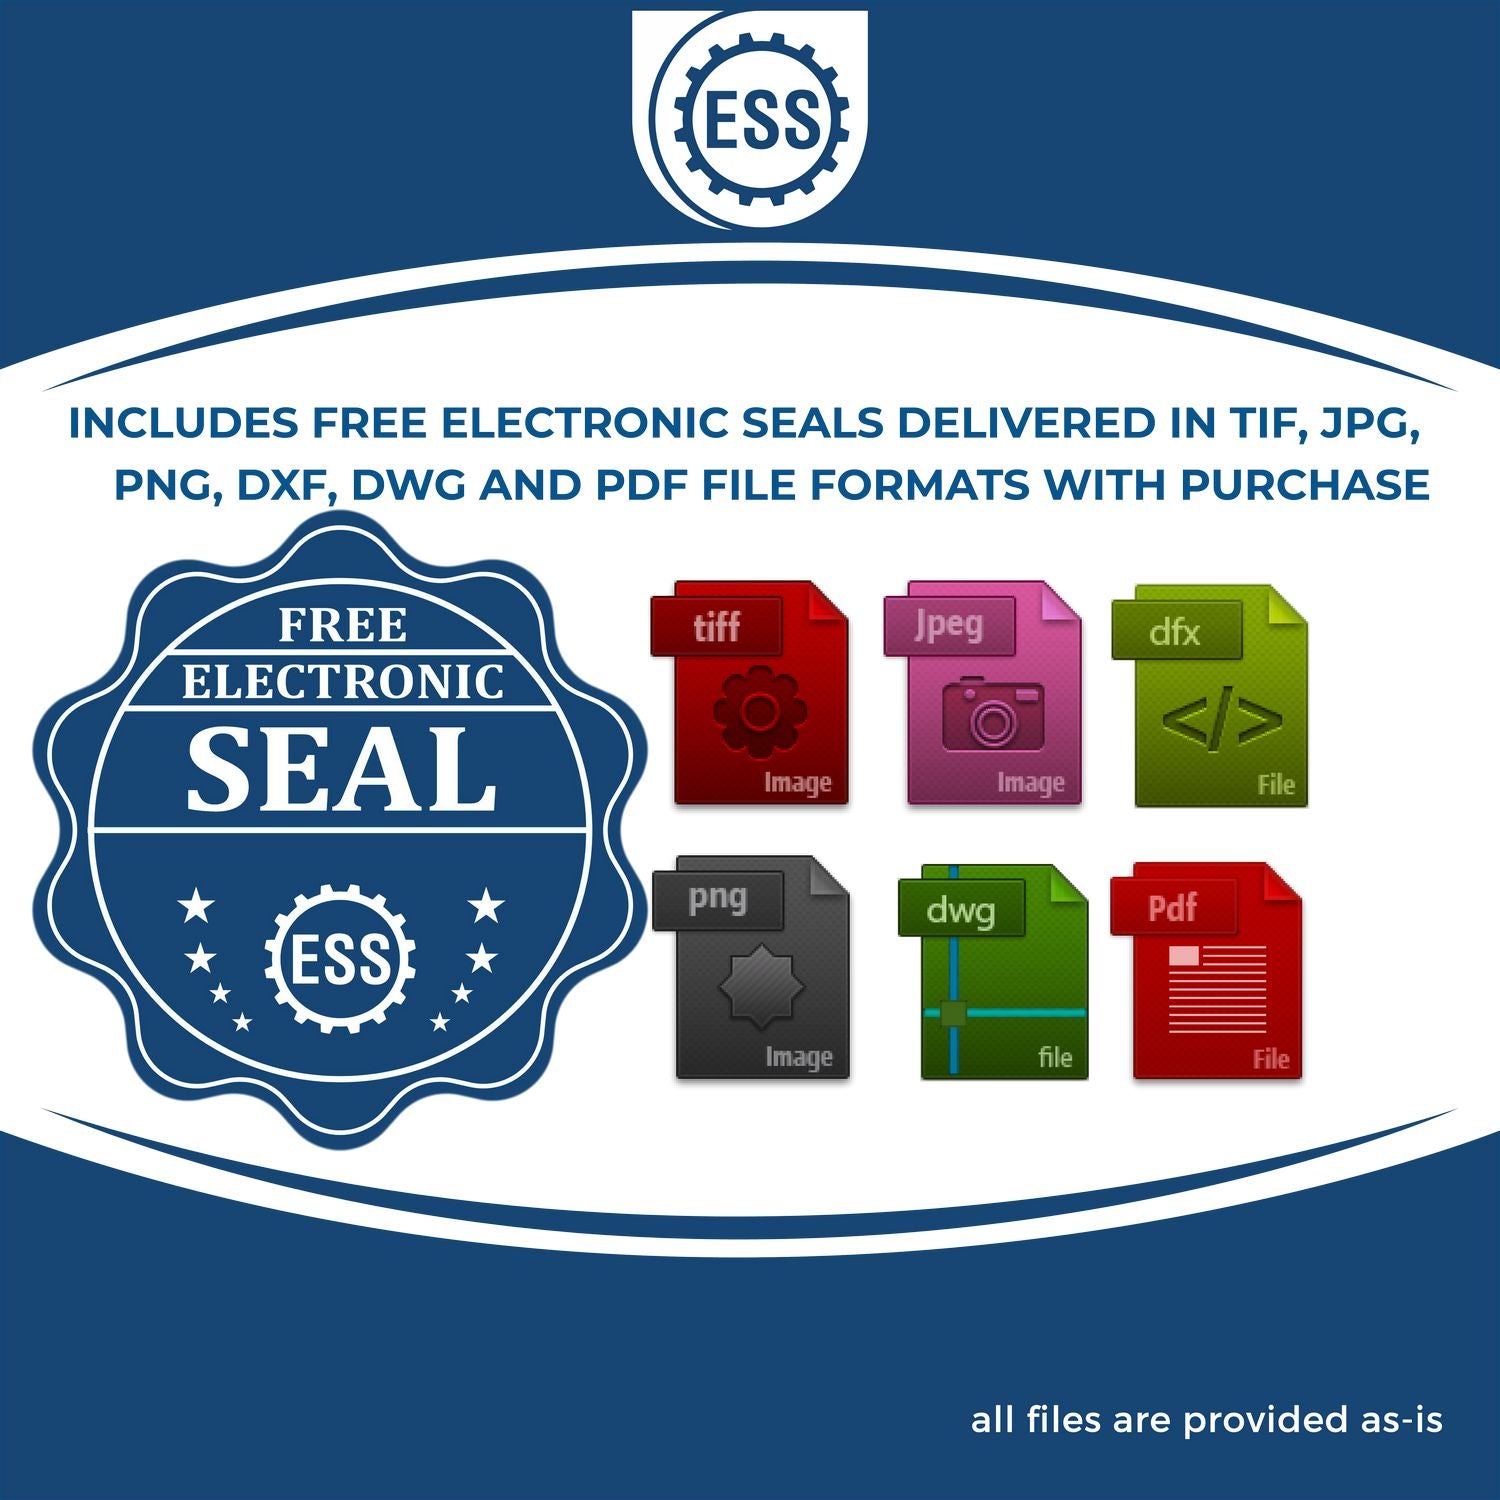 An infographic for the free electronic seal for the Heavy Duty Cast Iron North Dakota Land Surveyor Seal Embosser illustrating the different file type icons such as DXF, DWG, TIF, JPG and PNG.